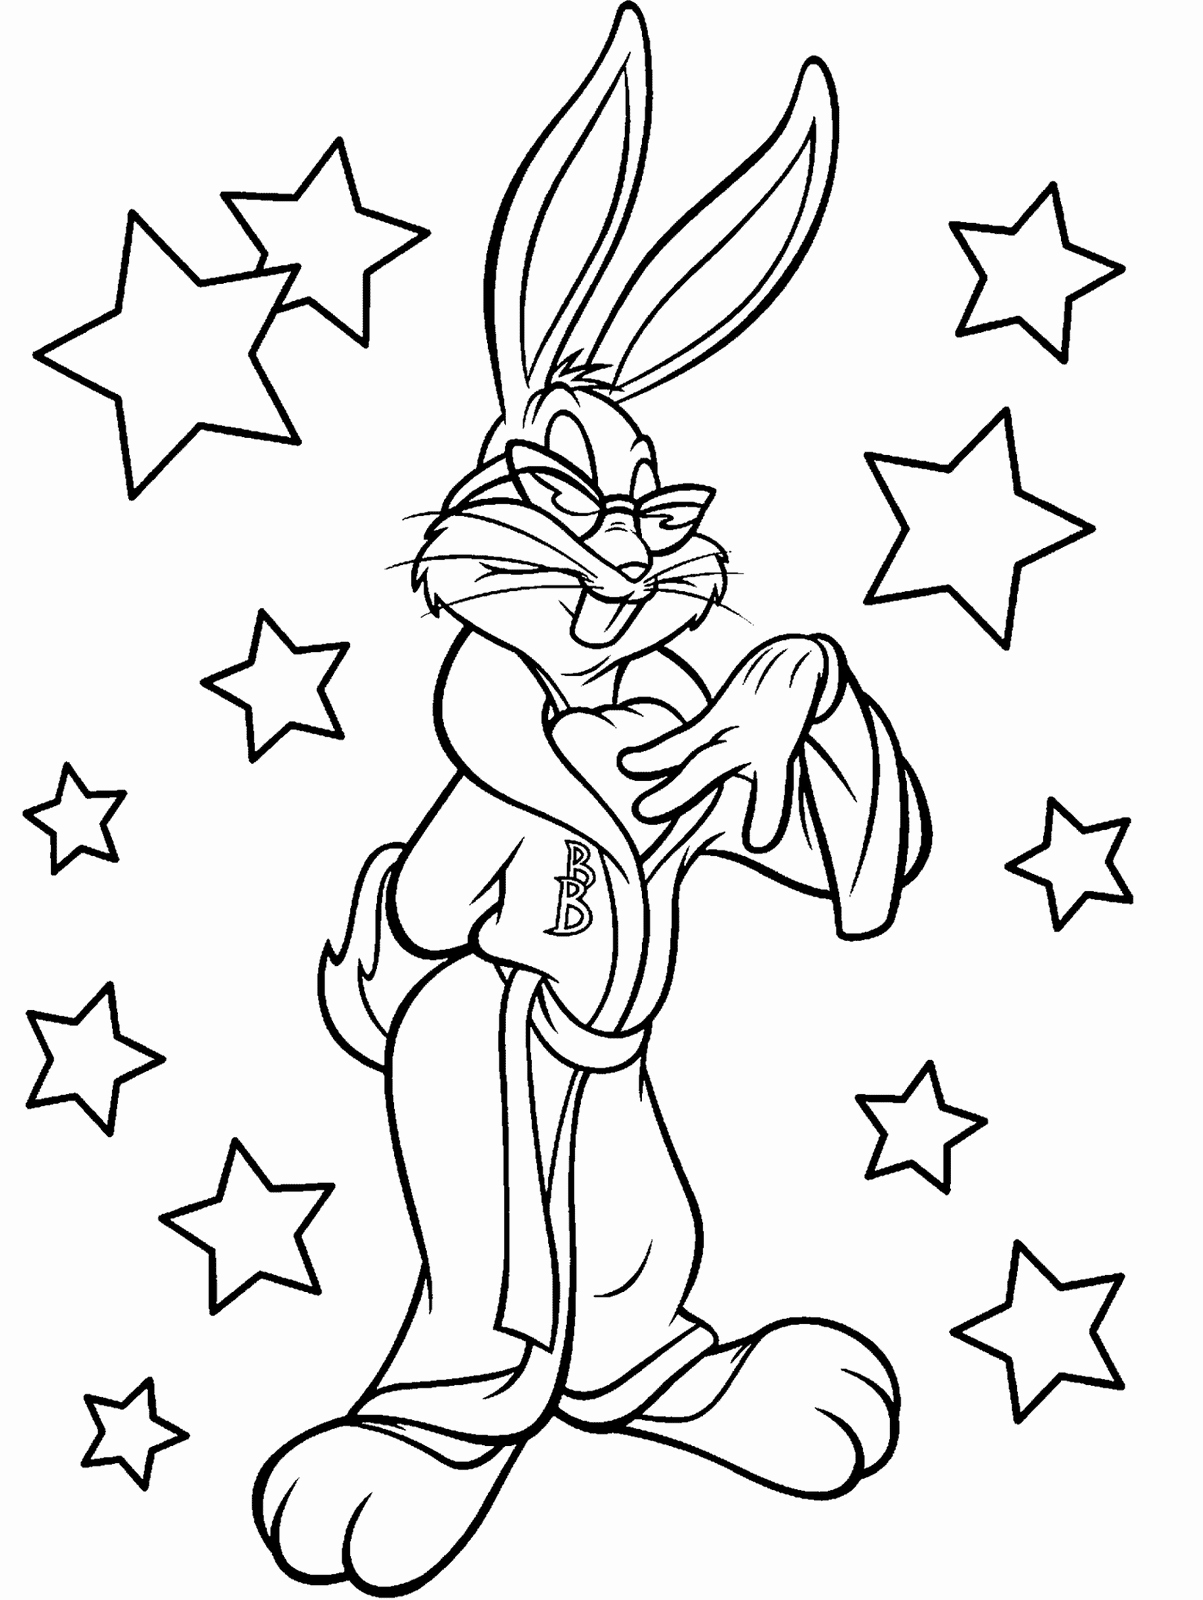 Pictures Of Bunnies to Print Beautiful Bunny Coloring Pages Best Coloring Pages for Kids